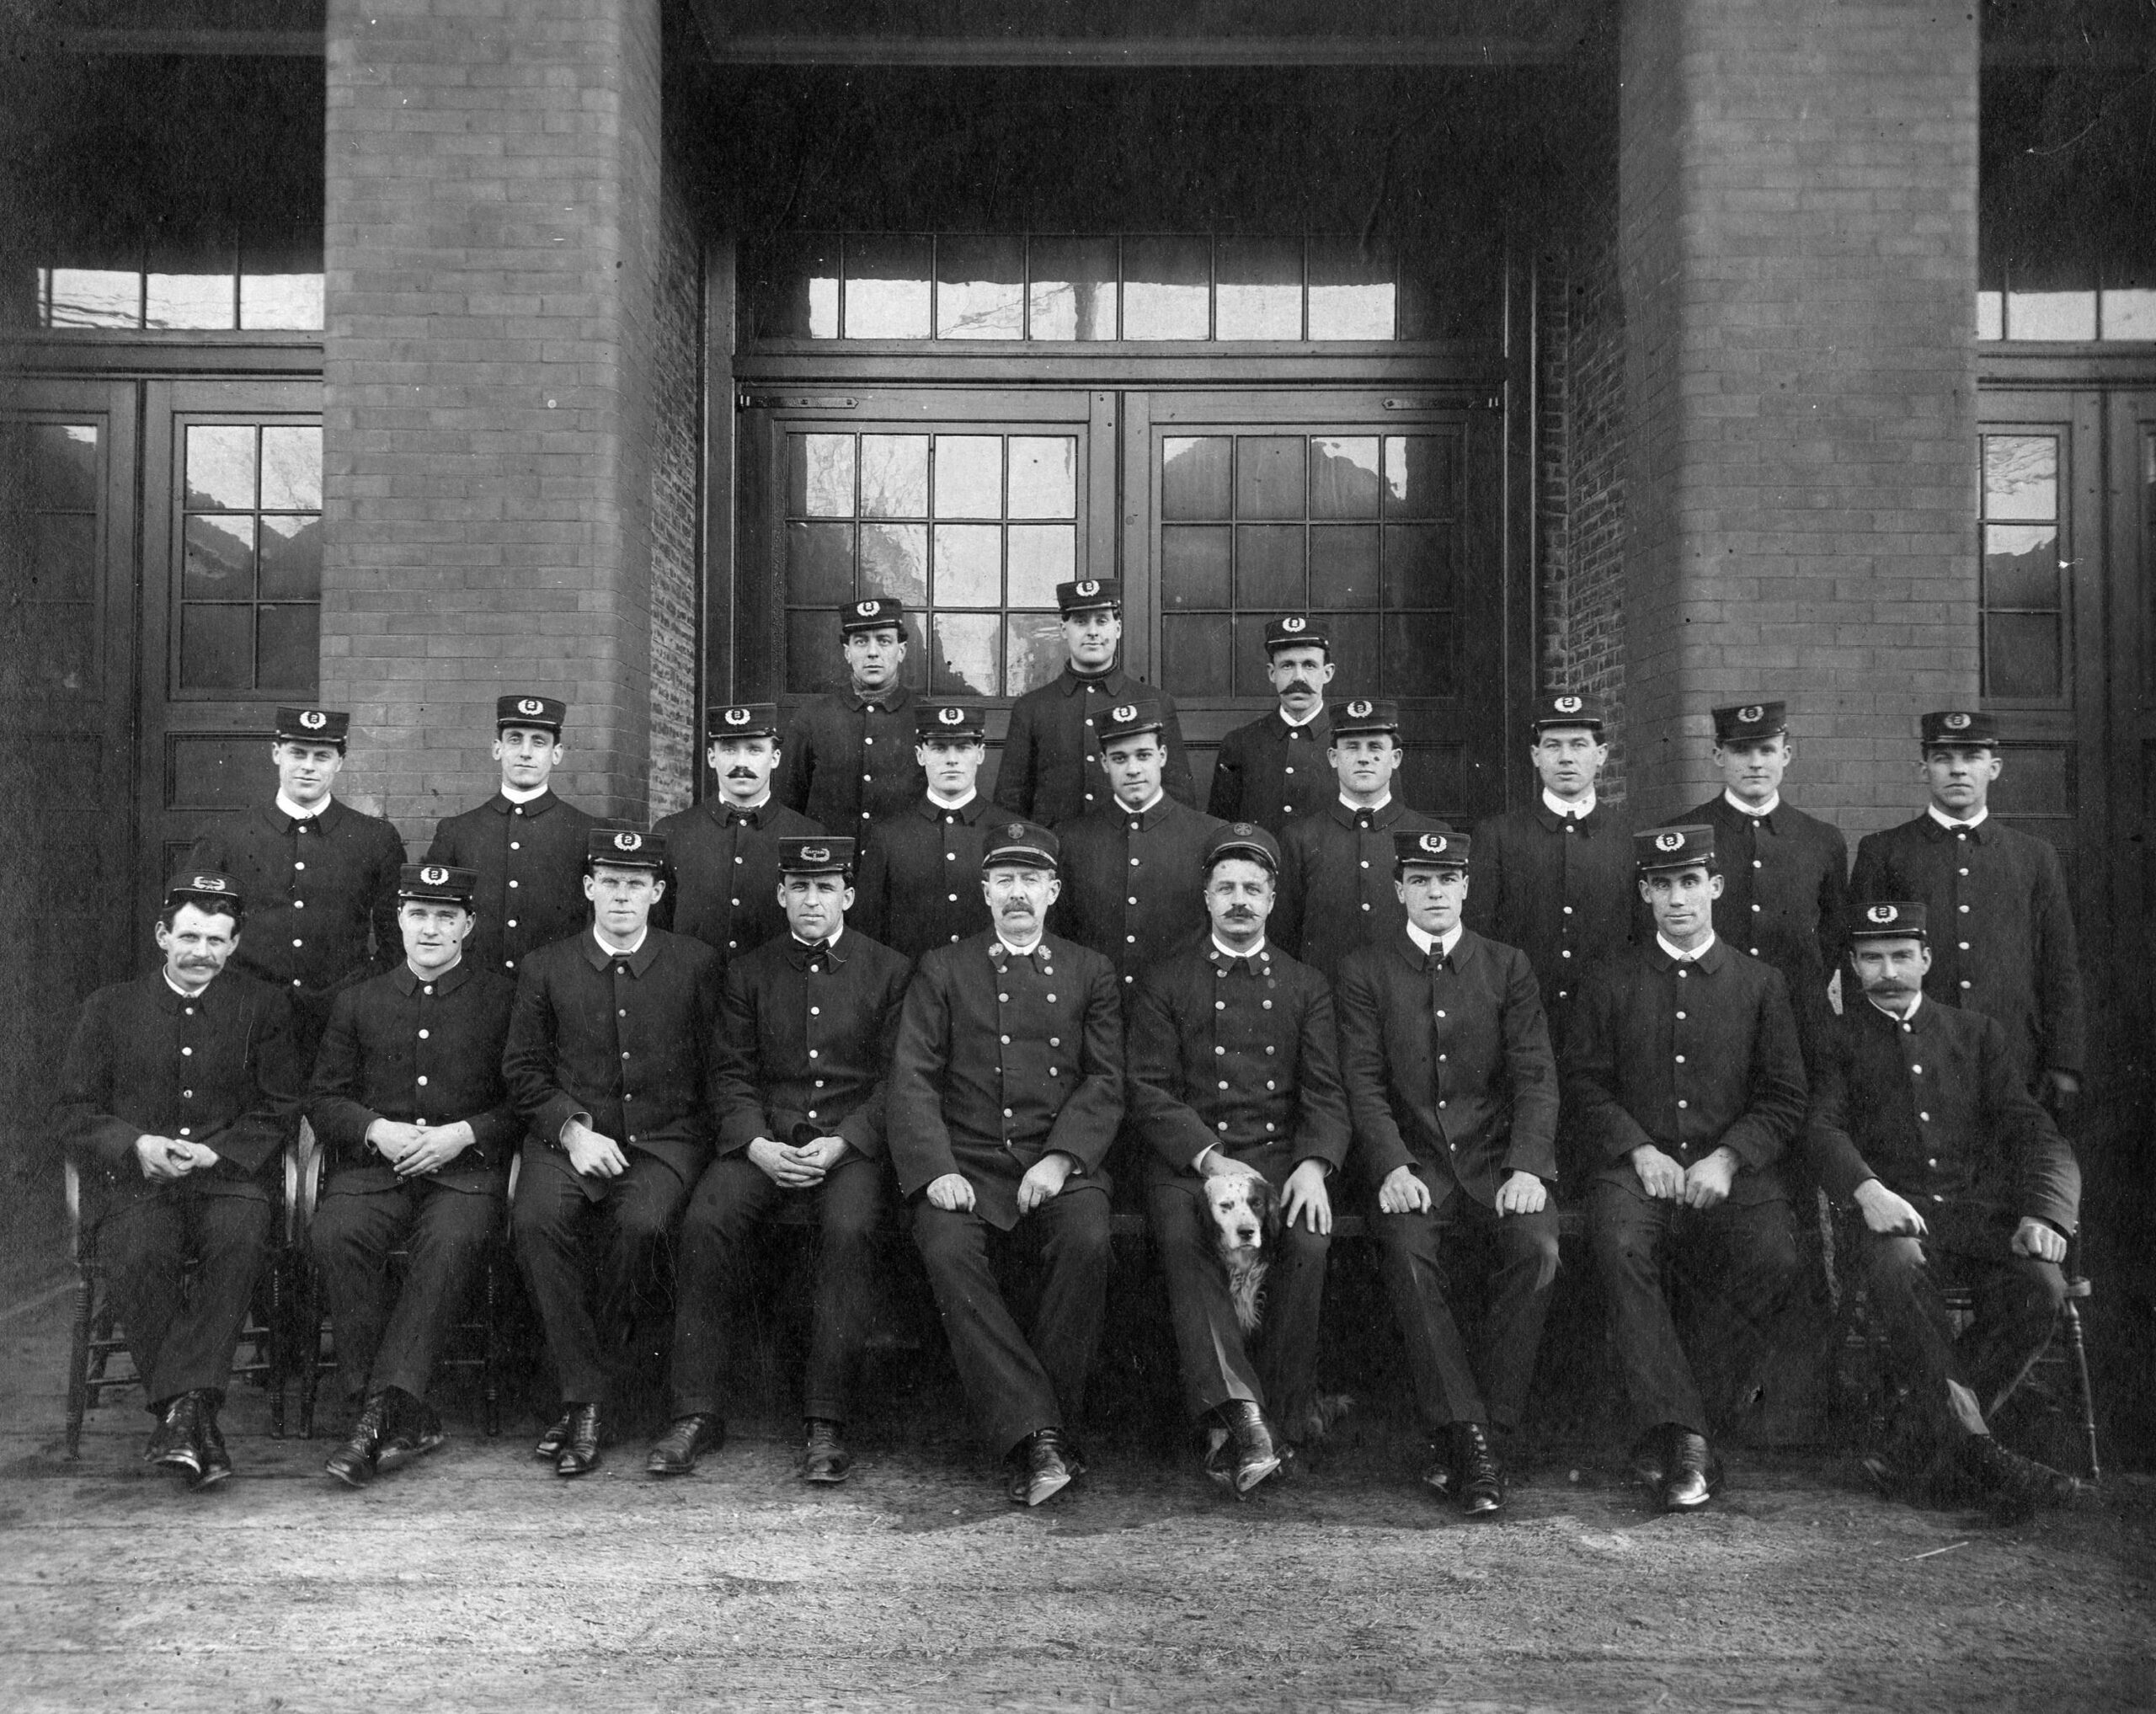 Group portrait at the No. 2 Fire Hall – complete with a pooch in the front row, ca. 1910. Reference code: COV-S280-: CVA 354-451